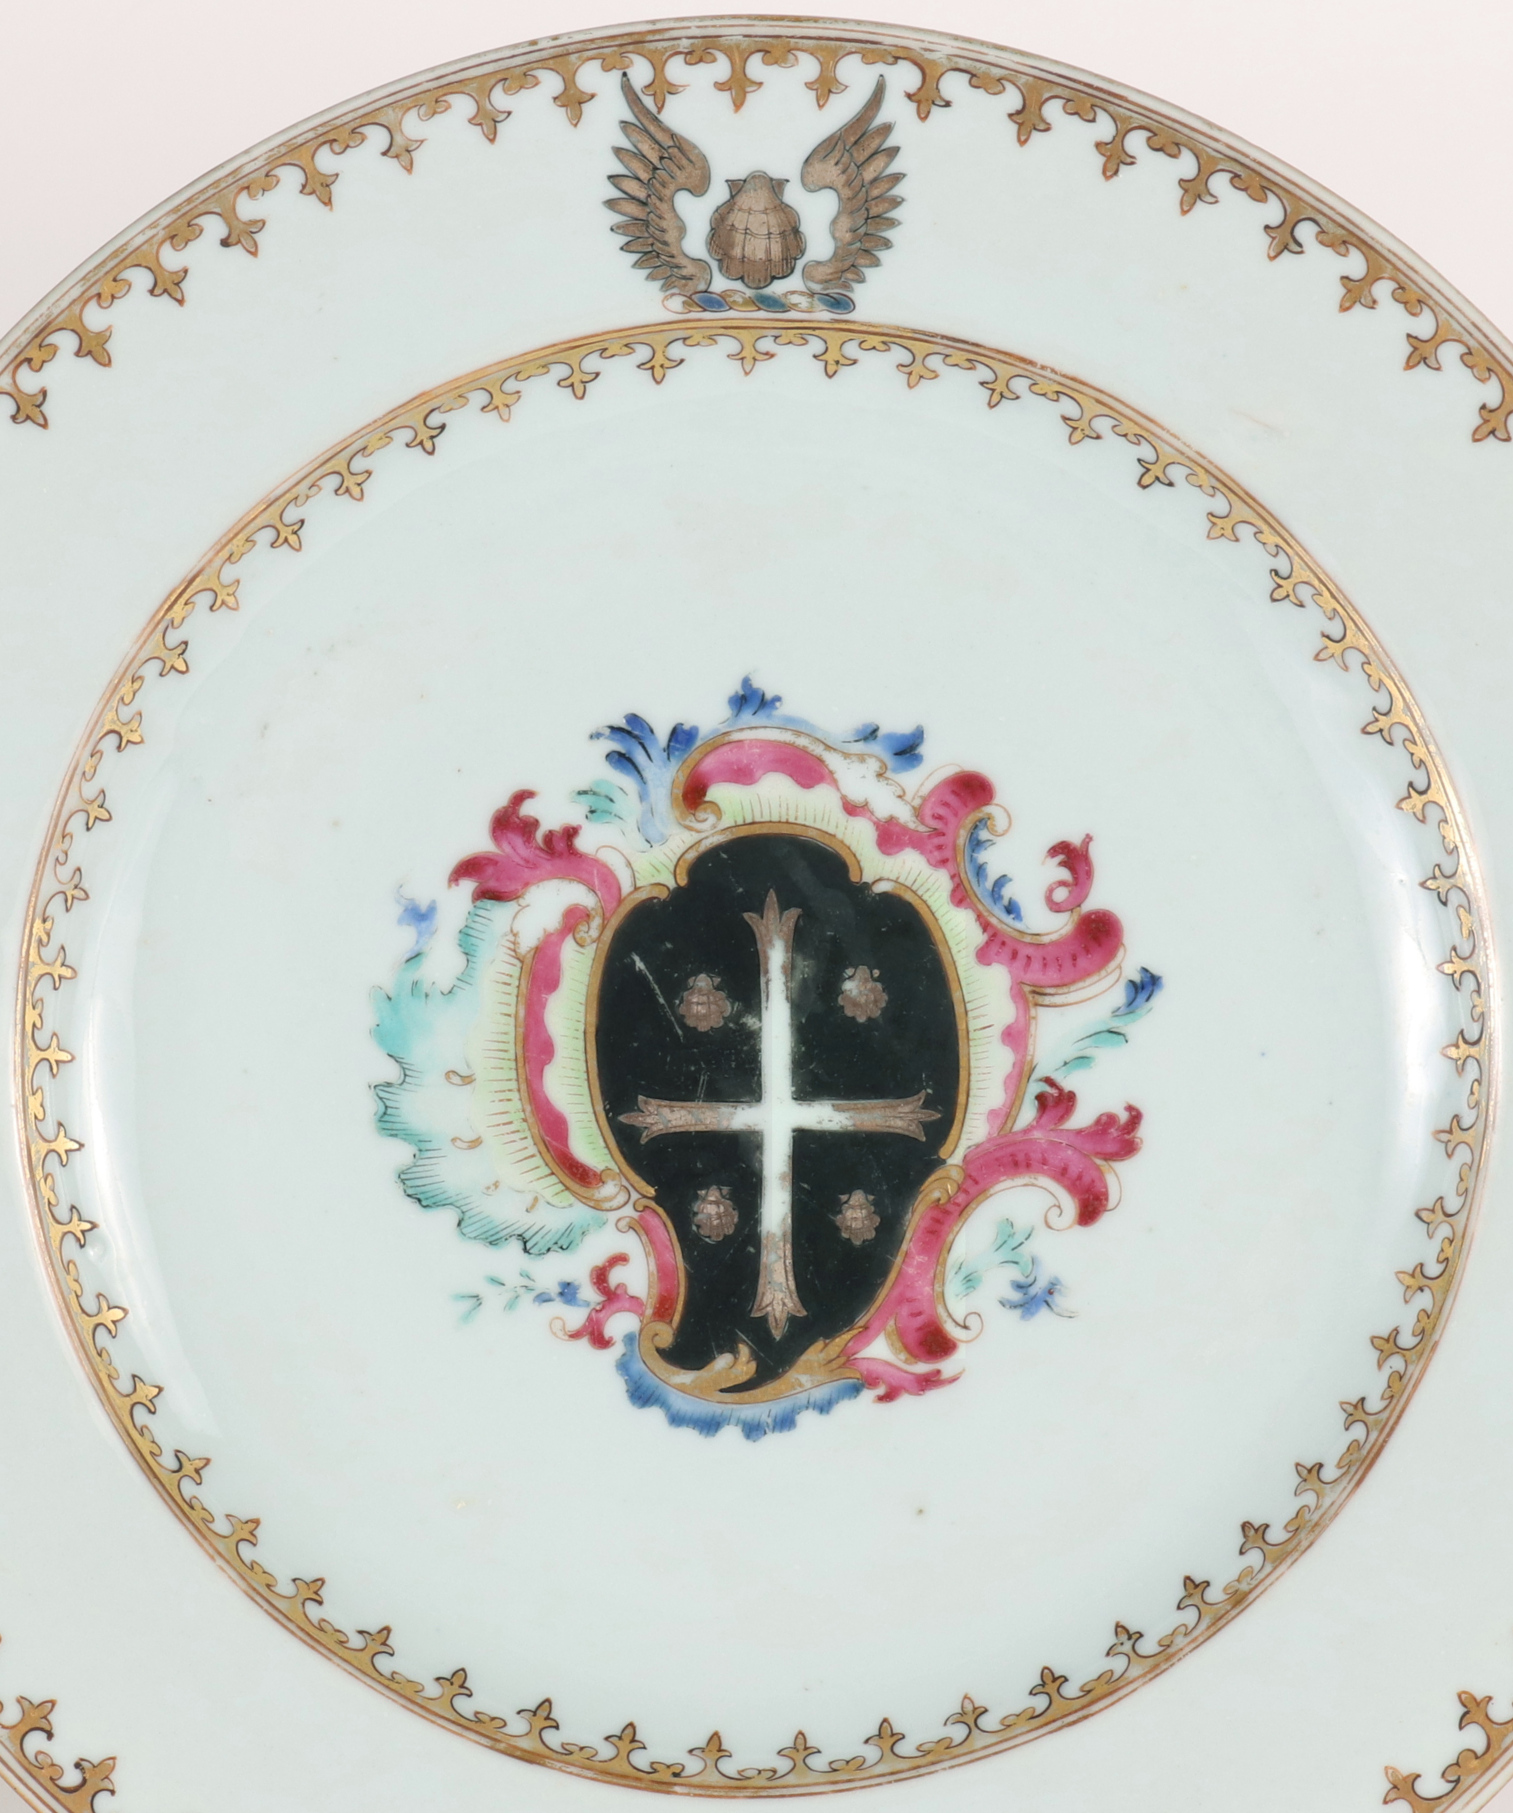 Chinese Export Armorial Plate, c. 1750